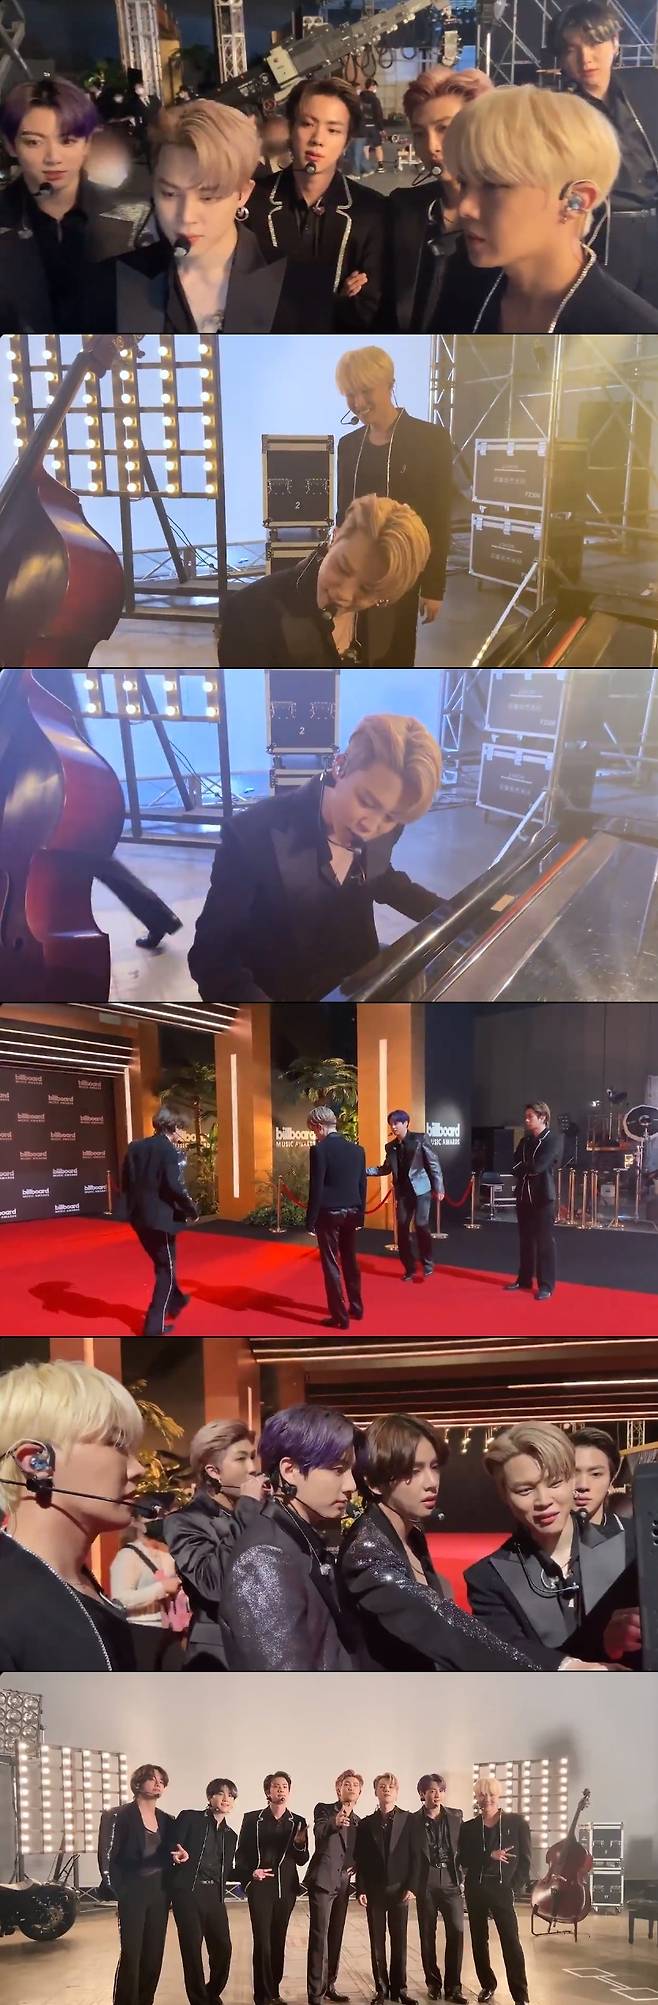 Group BTS (RM, Jean, Sugar, Jay Hop, Jimin, V, Jungkook) presented the all-black fashion.The 2021 Billboards Music Awards (hereinafter referred to as BBMAs) presented BTS stage spoiler videos and photos through official SNS on the morning of May 24 (hereinafter referred to as Korean time).The public images and photos show BTS wearing stage costumes, taking pictures of awards photo wall, and preparing new songs.The members are dressed in black suits of different designs and show 7 color charms.BTS will release its new digital single Butter (Butter) stage, which was released at 1 pm on the 21st and won the top spot on domestic and overseas music charts at the awards.It is also of interest whether the four-time champion will be achieved.BTS was nominated for four categories this year (top Iruvar/group, top song sales The Artist, top social The Artist, top-selling song), and was honored with three categories of awards, excluding top-selling songs (awards announced in later awards) at the pre-awards pre-awards.In the top song sales The Artist category, it was nominated for the first time this year and was honored with the Awards, and the top Iruvar/group awards are the second after 2019.The Top Social The Artist Trophy has been awarded for five consecutive years since 2017 when it was first invited to the Billboards Music Awards.